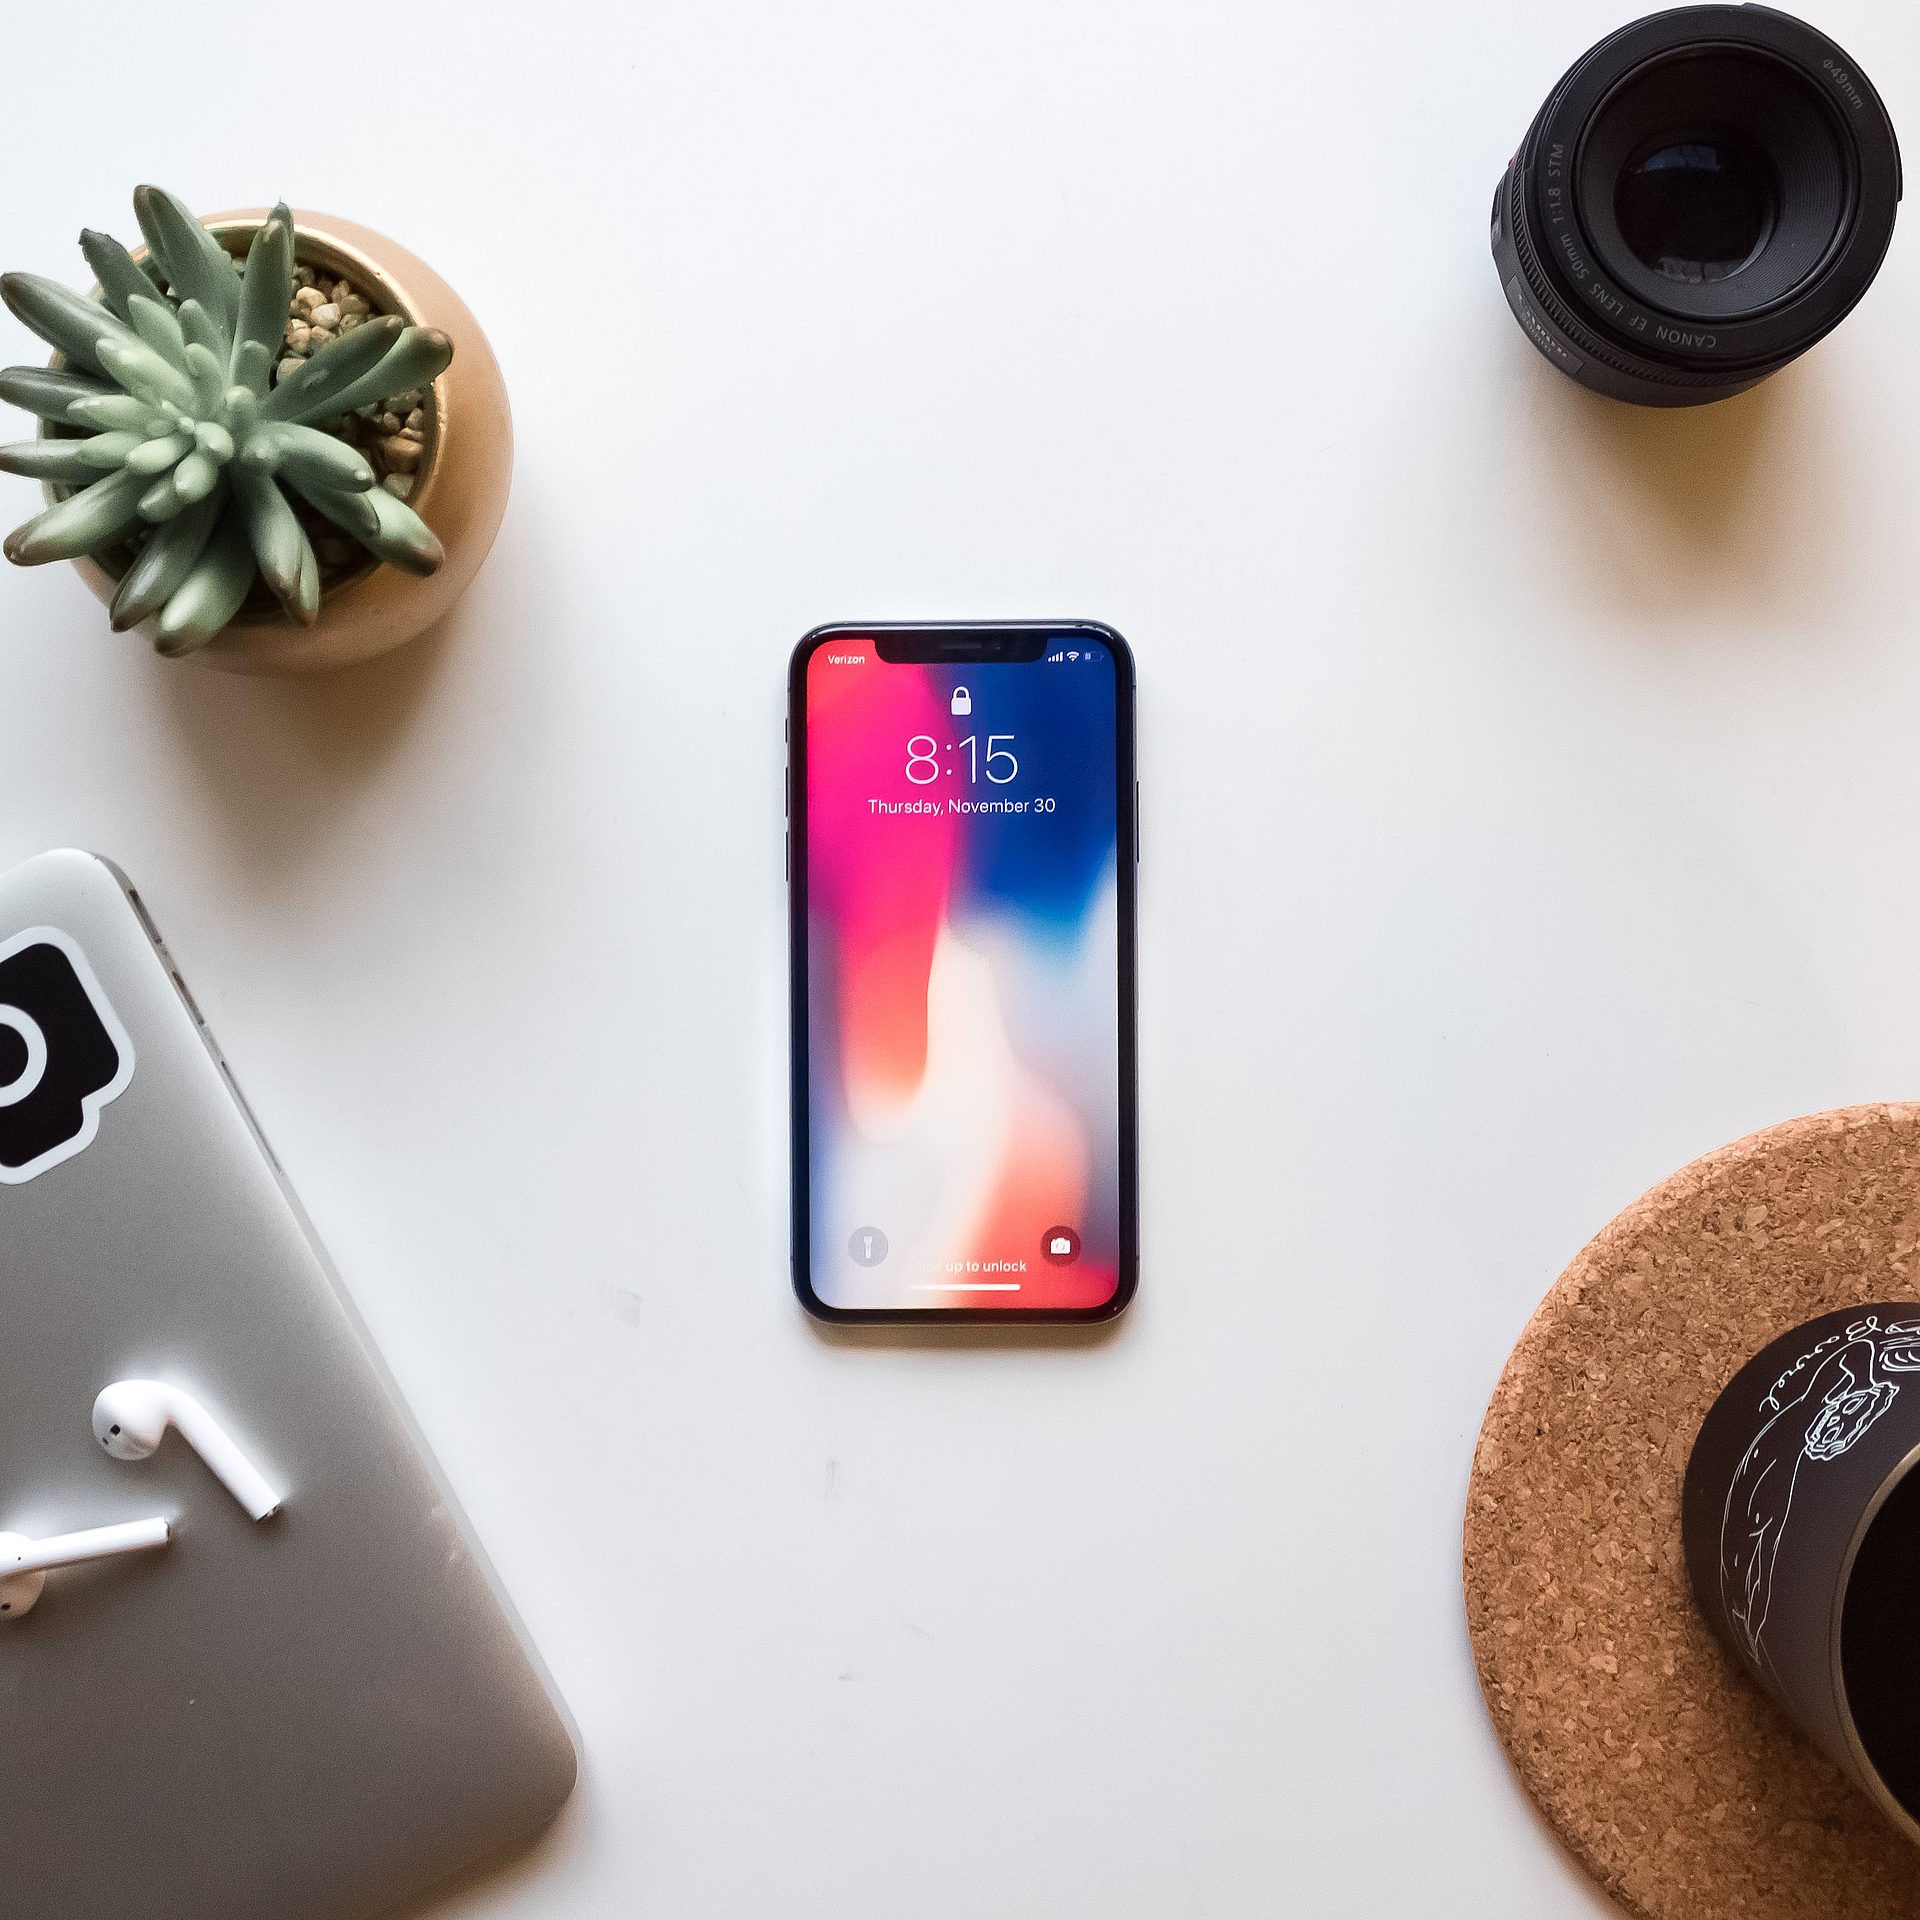 Discover why your iPhone randomly vibrates and how to fix it with expert solutions in this comprehensive guide. Keep reading and explore now!